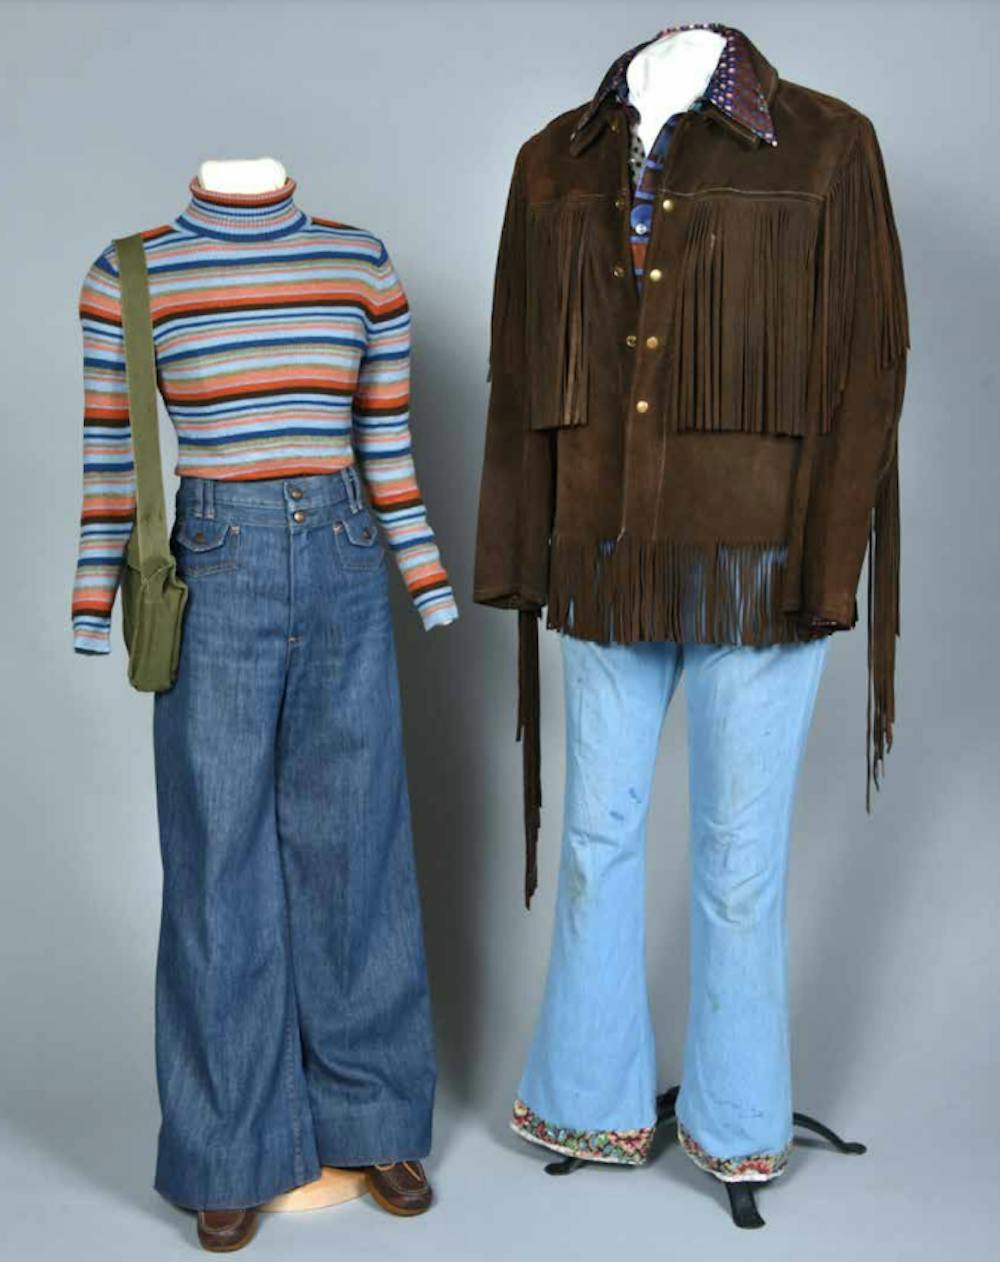 Who wears the pants? Gender and fashion in the 60s-80s